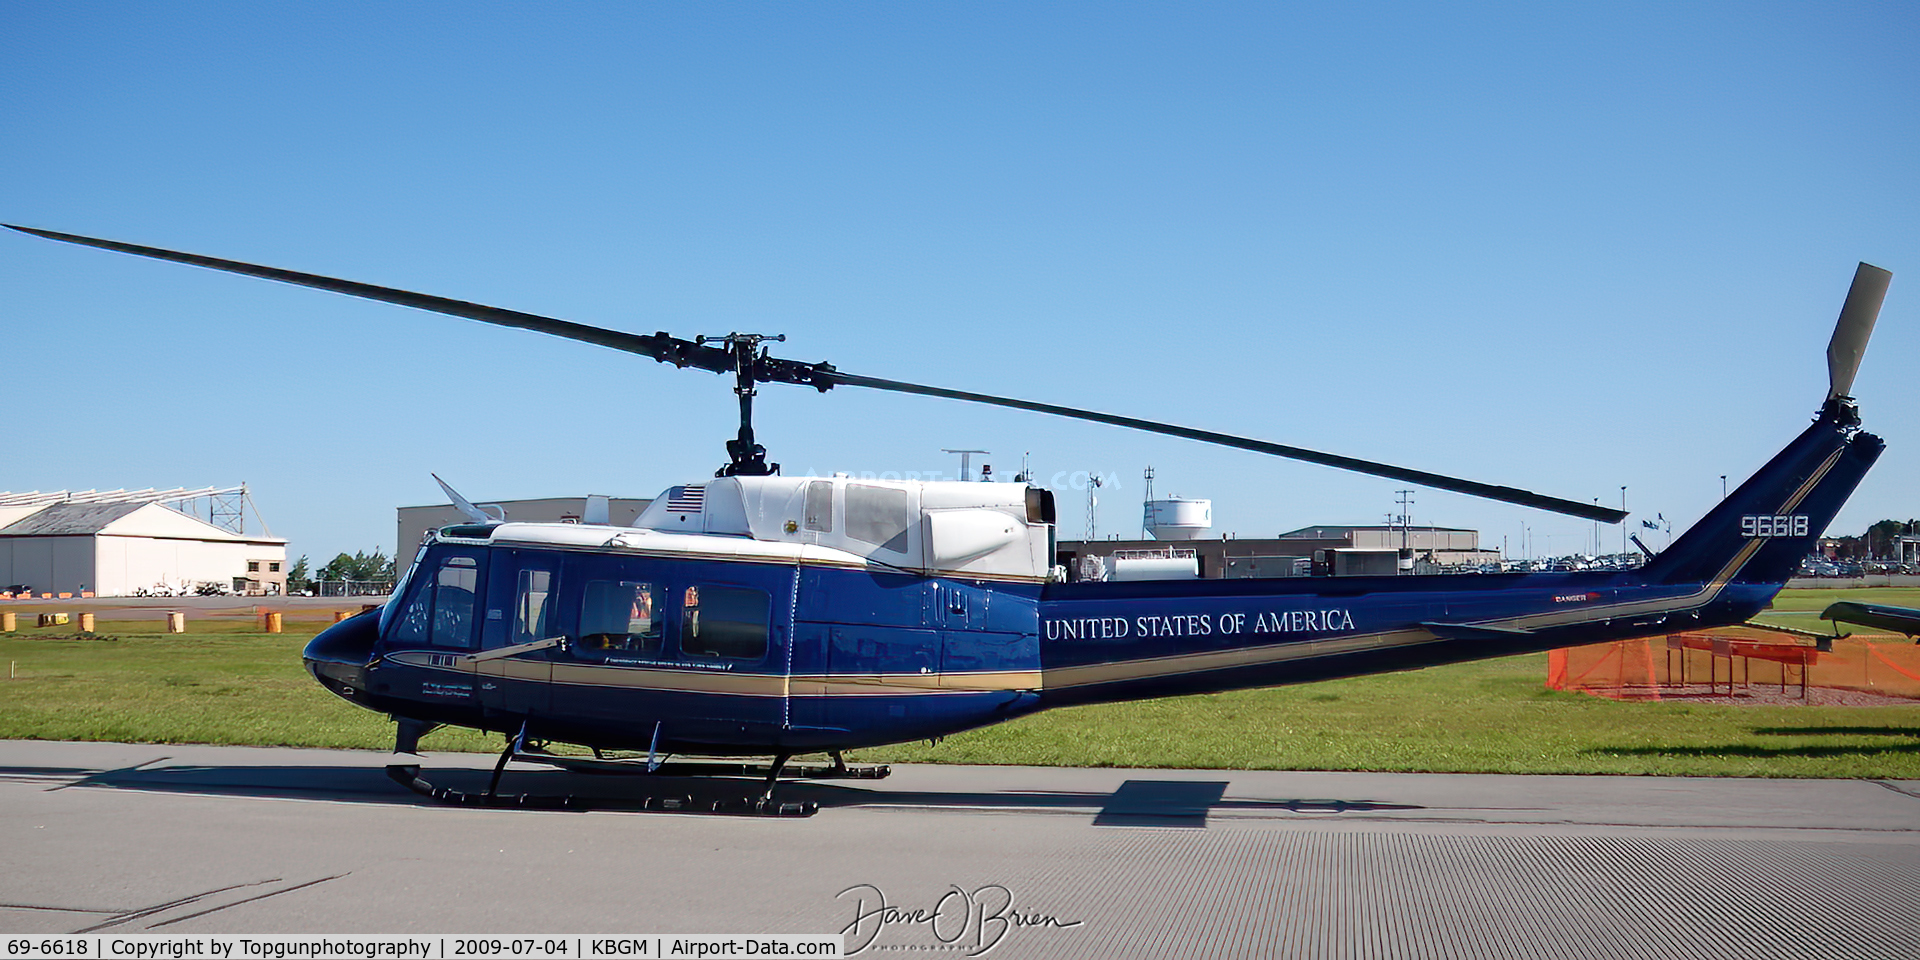 69-6618, 1970 Bell UH-1N C/N 31024, 1st HS out of Andrews AFB